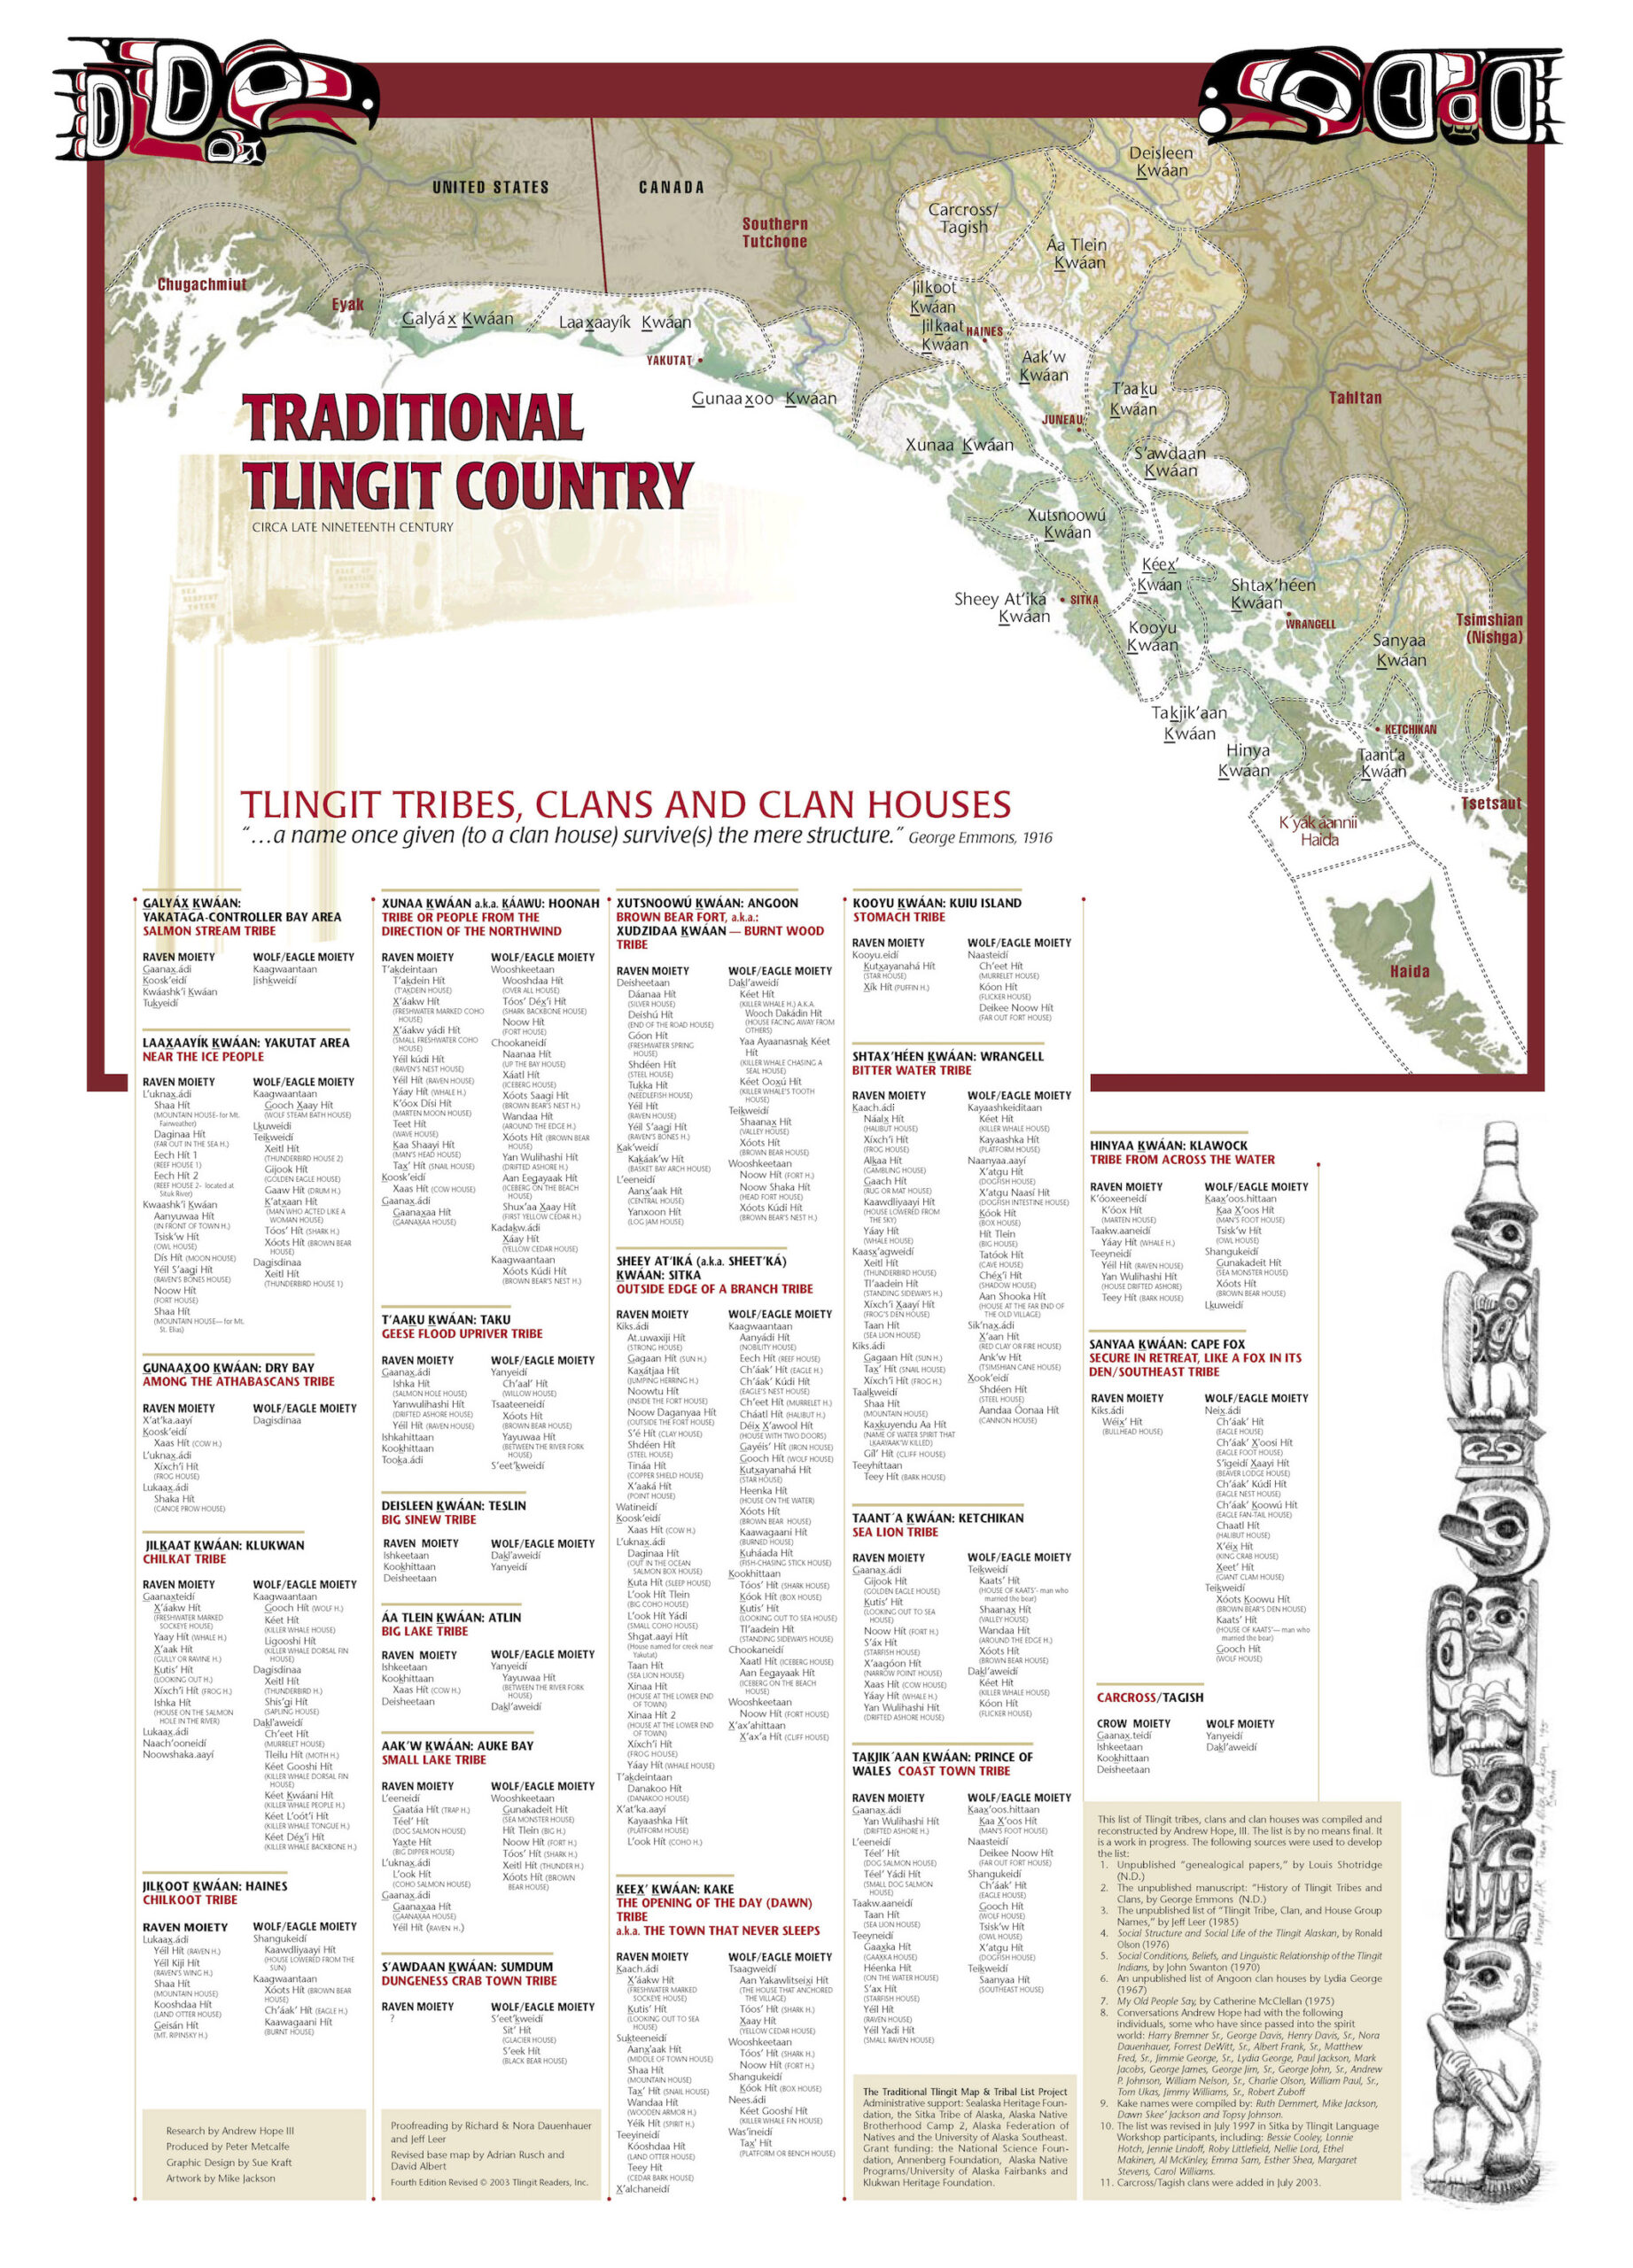 Tlingit tribes, clans, and clan houses. Research for the map by Andrew Hope III